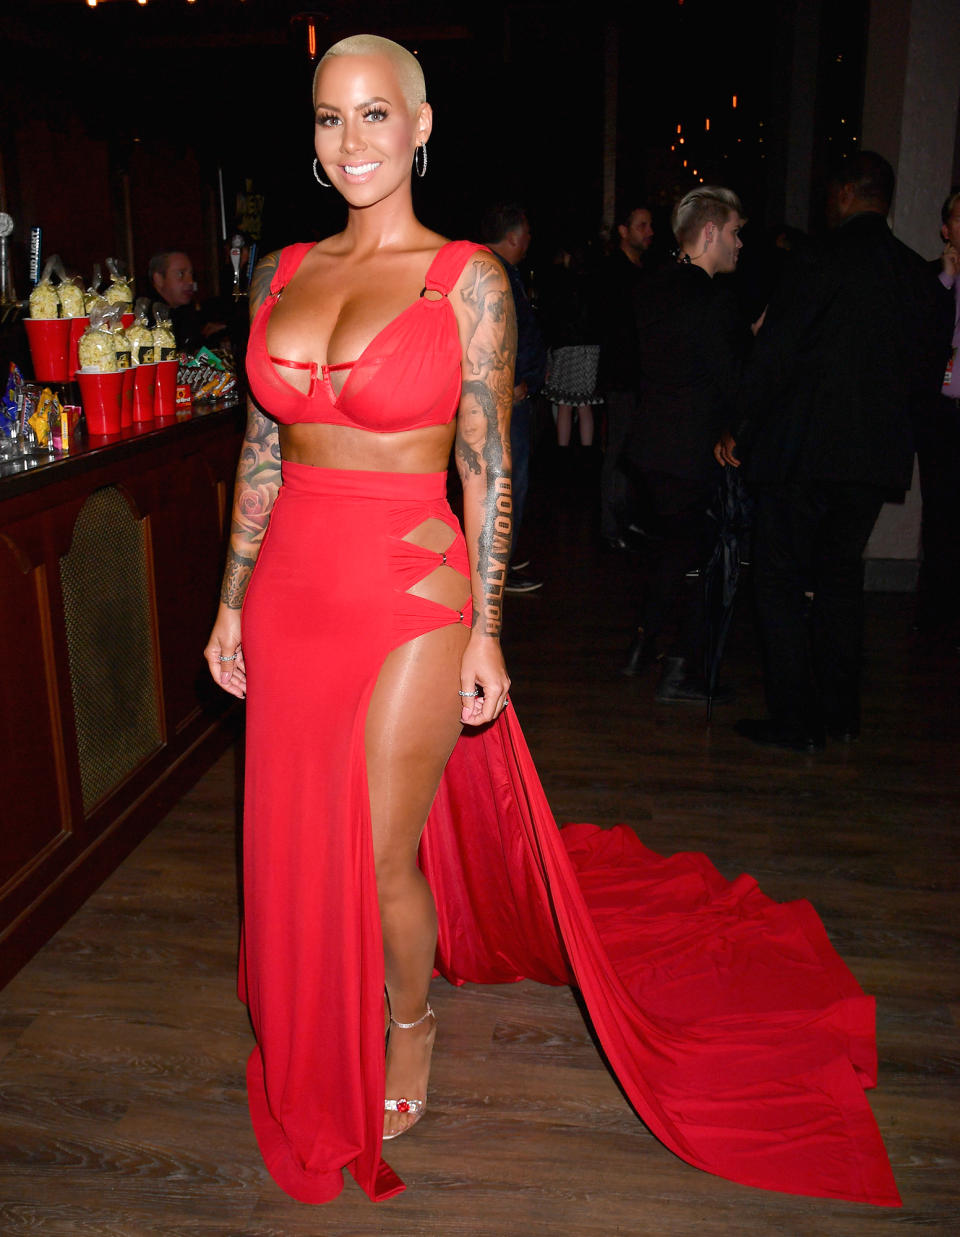 Amber Rose Wants a Breast Reduction: 'My Boobs Are Stupid Heavy'